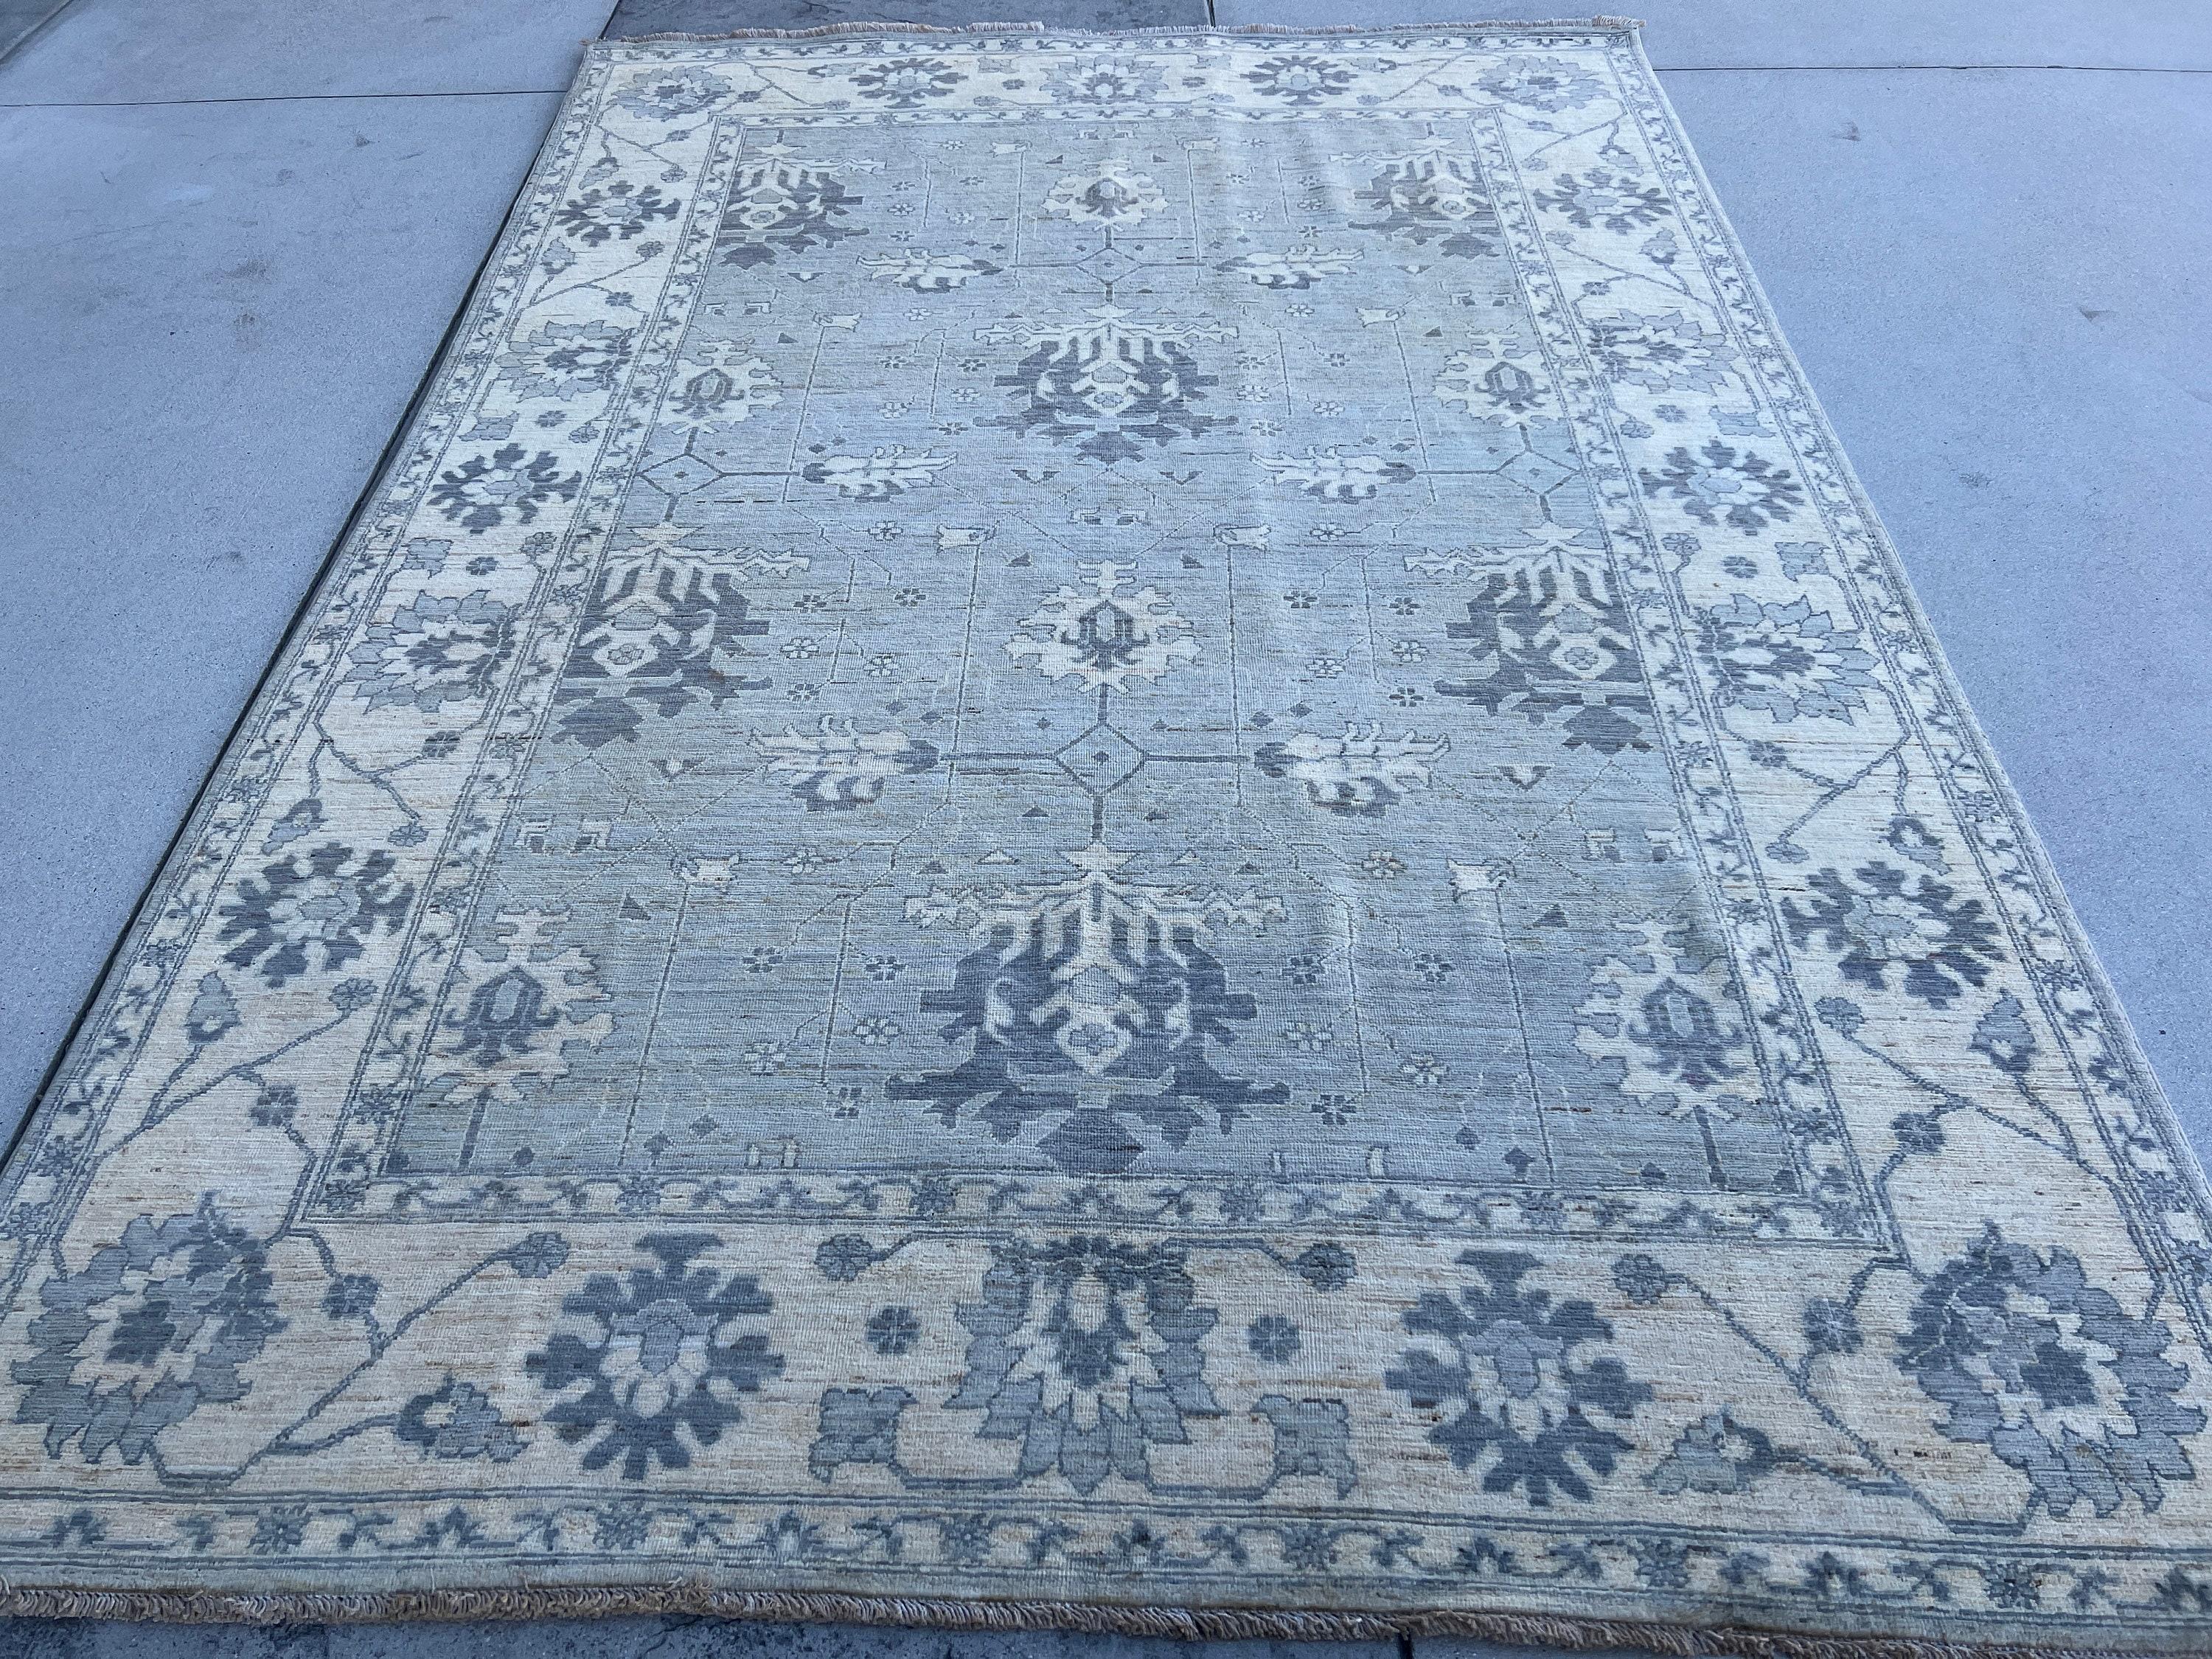 Hand-Knotted Afghan Oushak Rug Premium Hand-Spun Afghan Wool Fair Trade In New Condition For Sale In San Marcos, CA